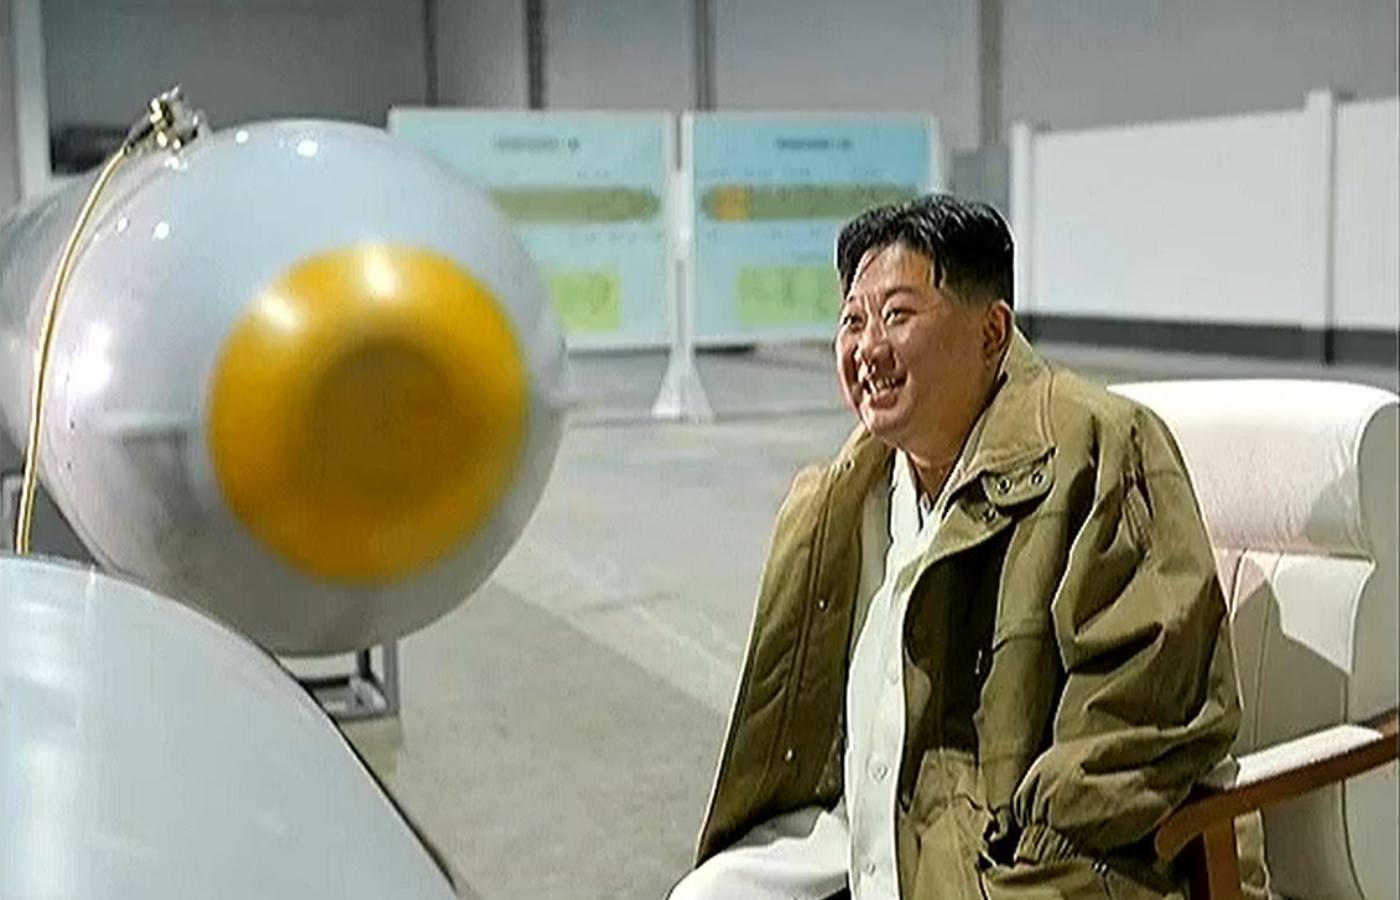 North Korea’s official Rodong Sinmun newspaper published photographs of Kim smiling next to a large torpedo-shaped object .